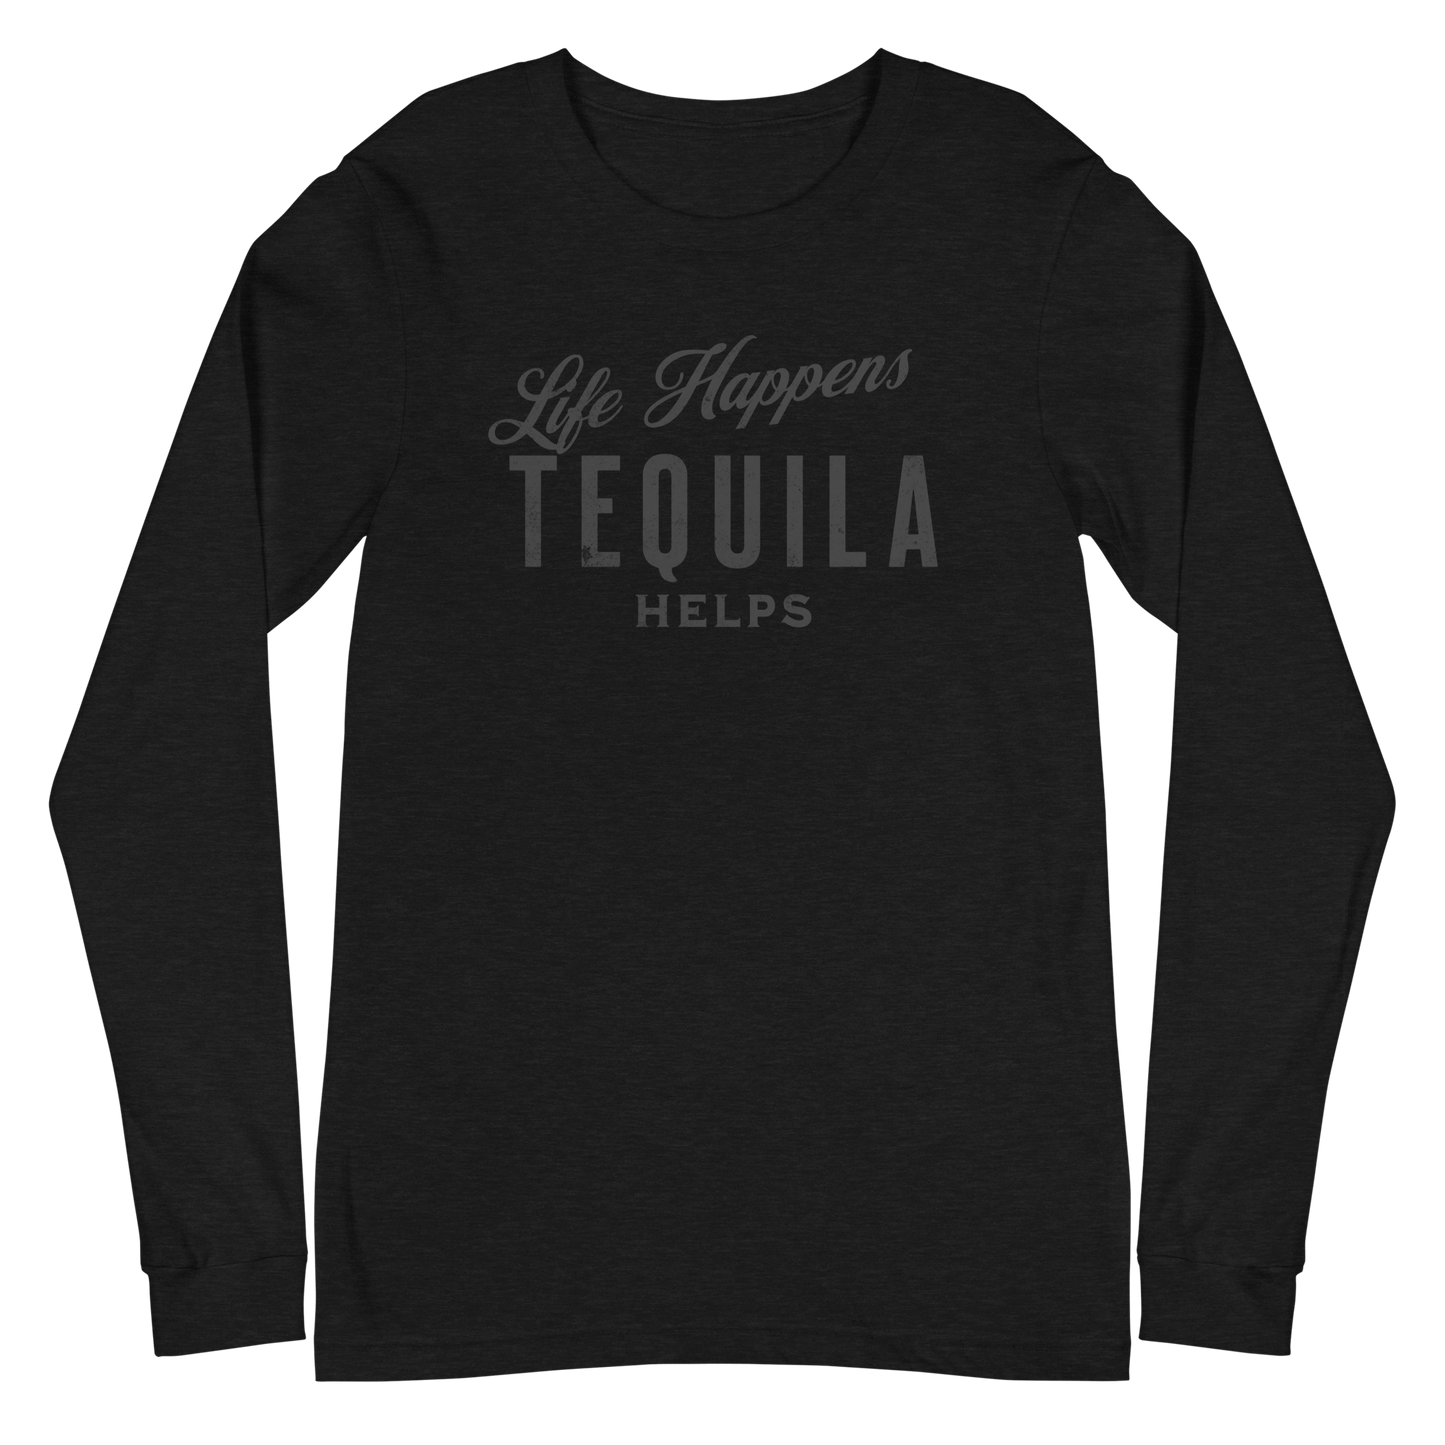 Life Happens Tequila Helps Tee - Versatile Long Sleeve DRINKING,LONG SLEEVE TEE,MENS,New,TEQUILA,UNISEX,WOMENS Dayzzed Apparel